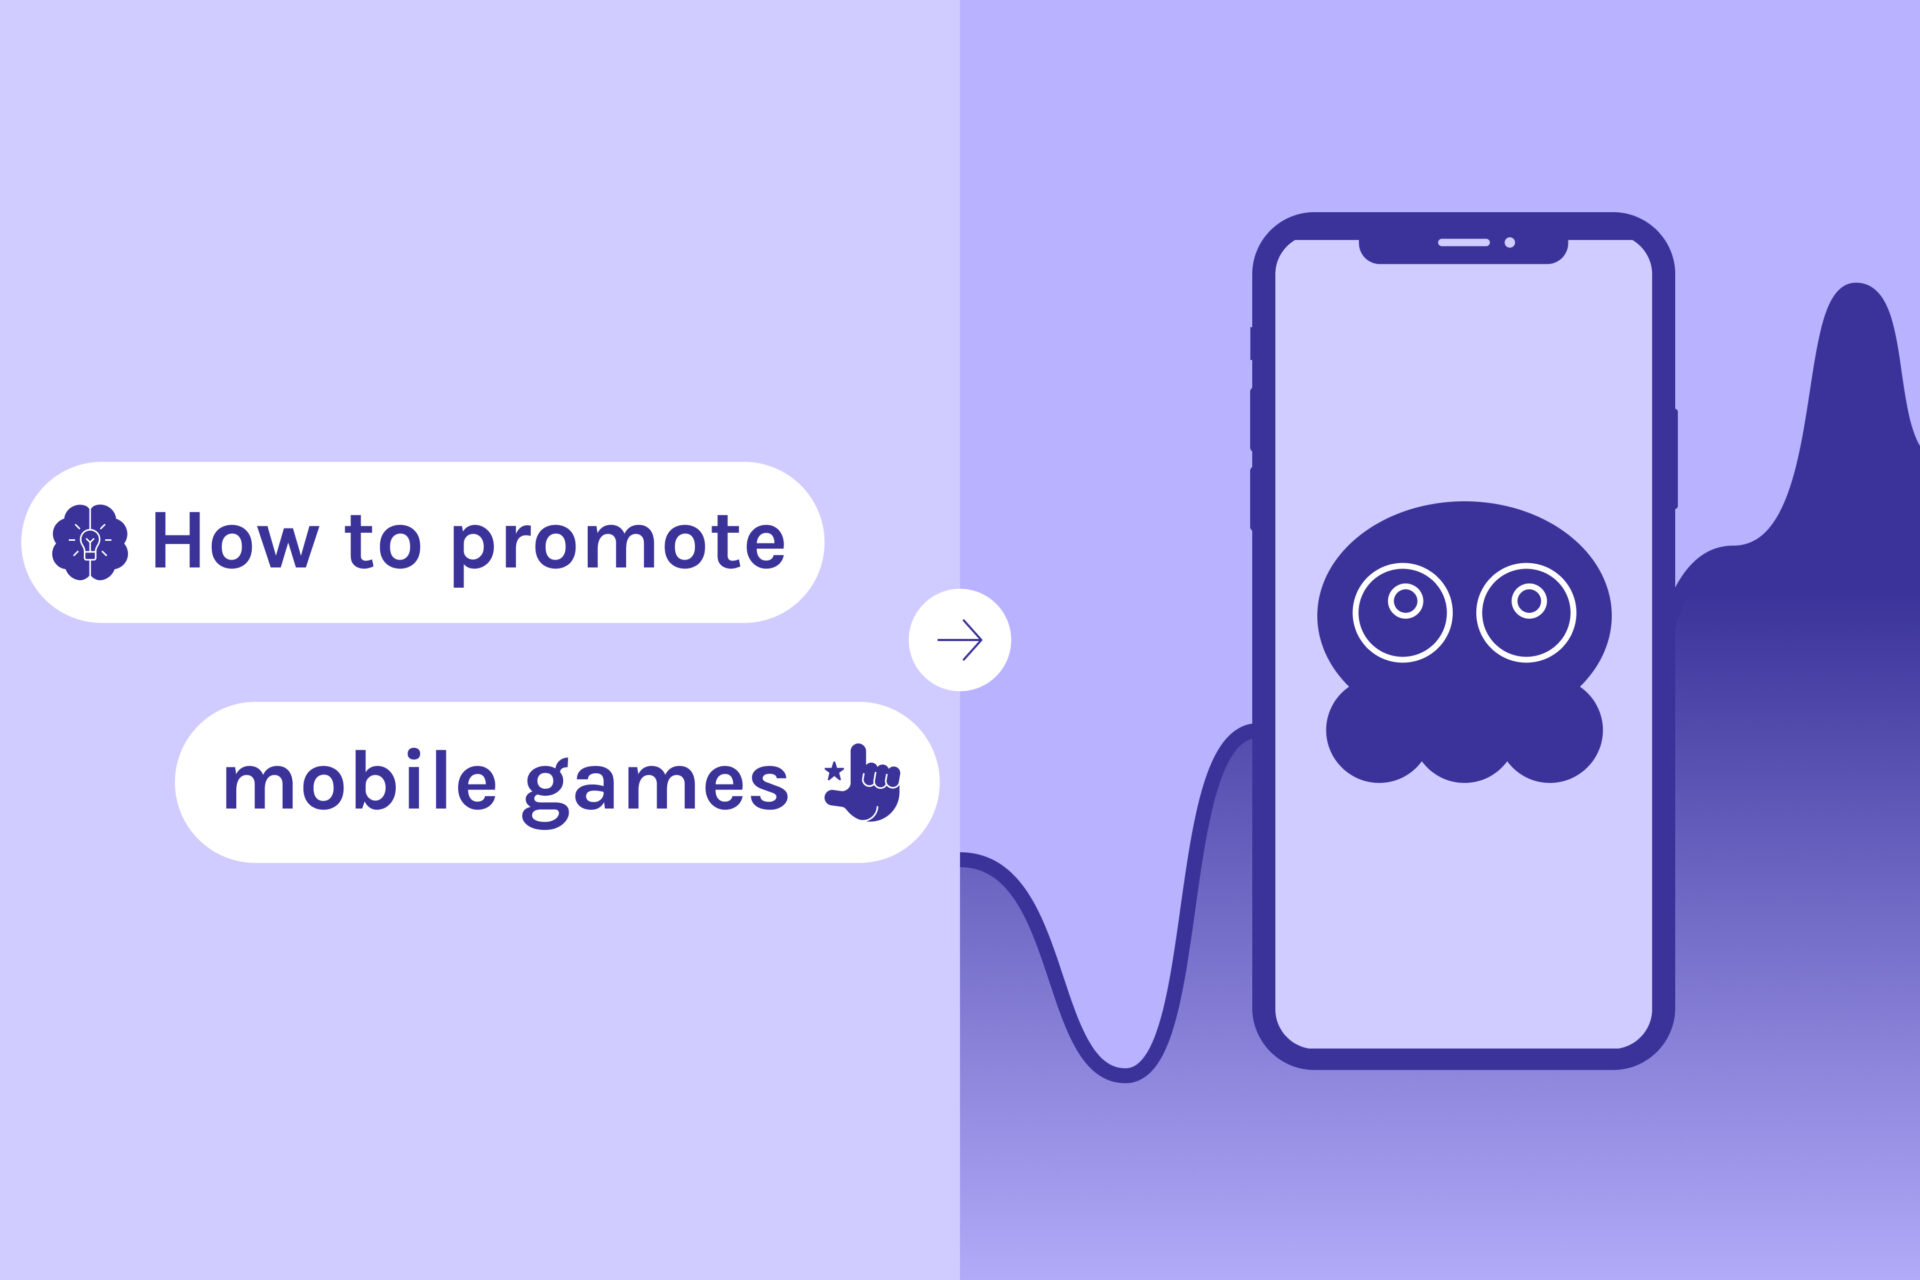 4 Tips To Increase Downloads For A Mobile Game